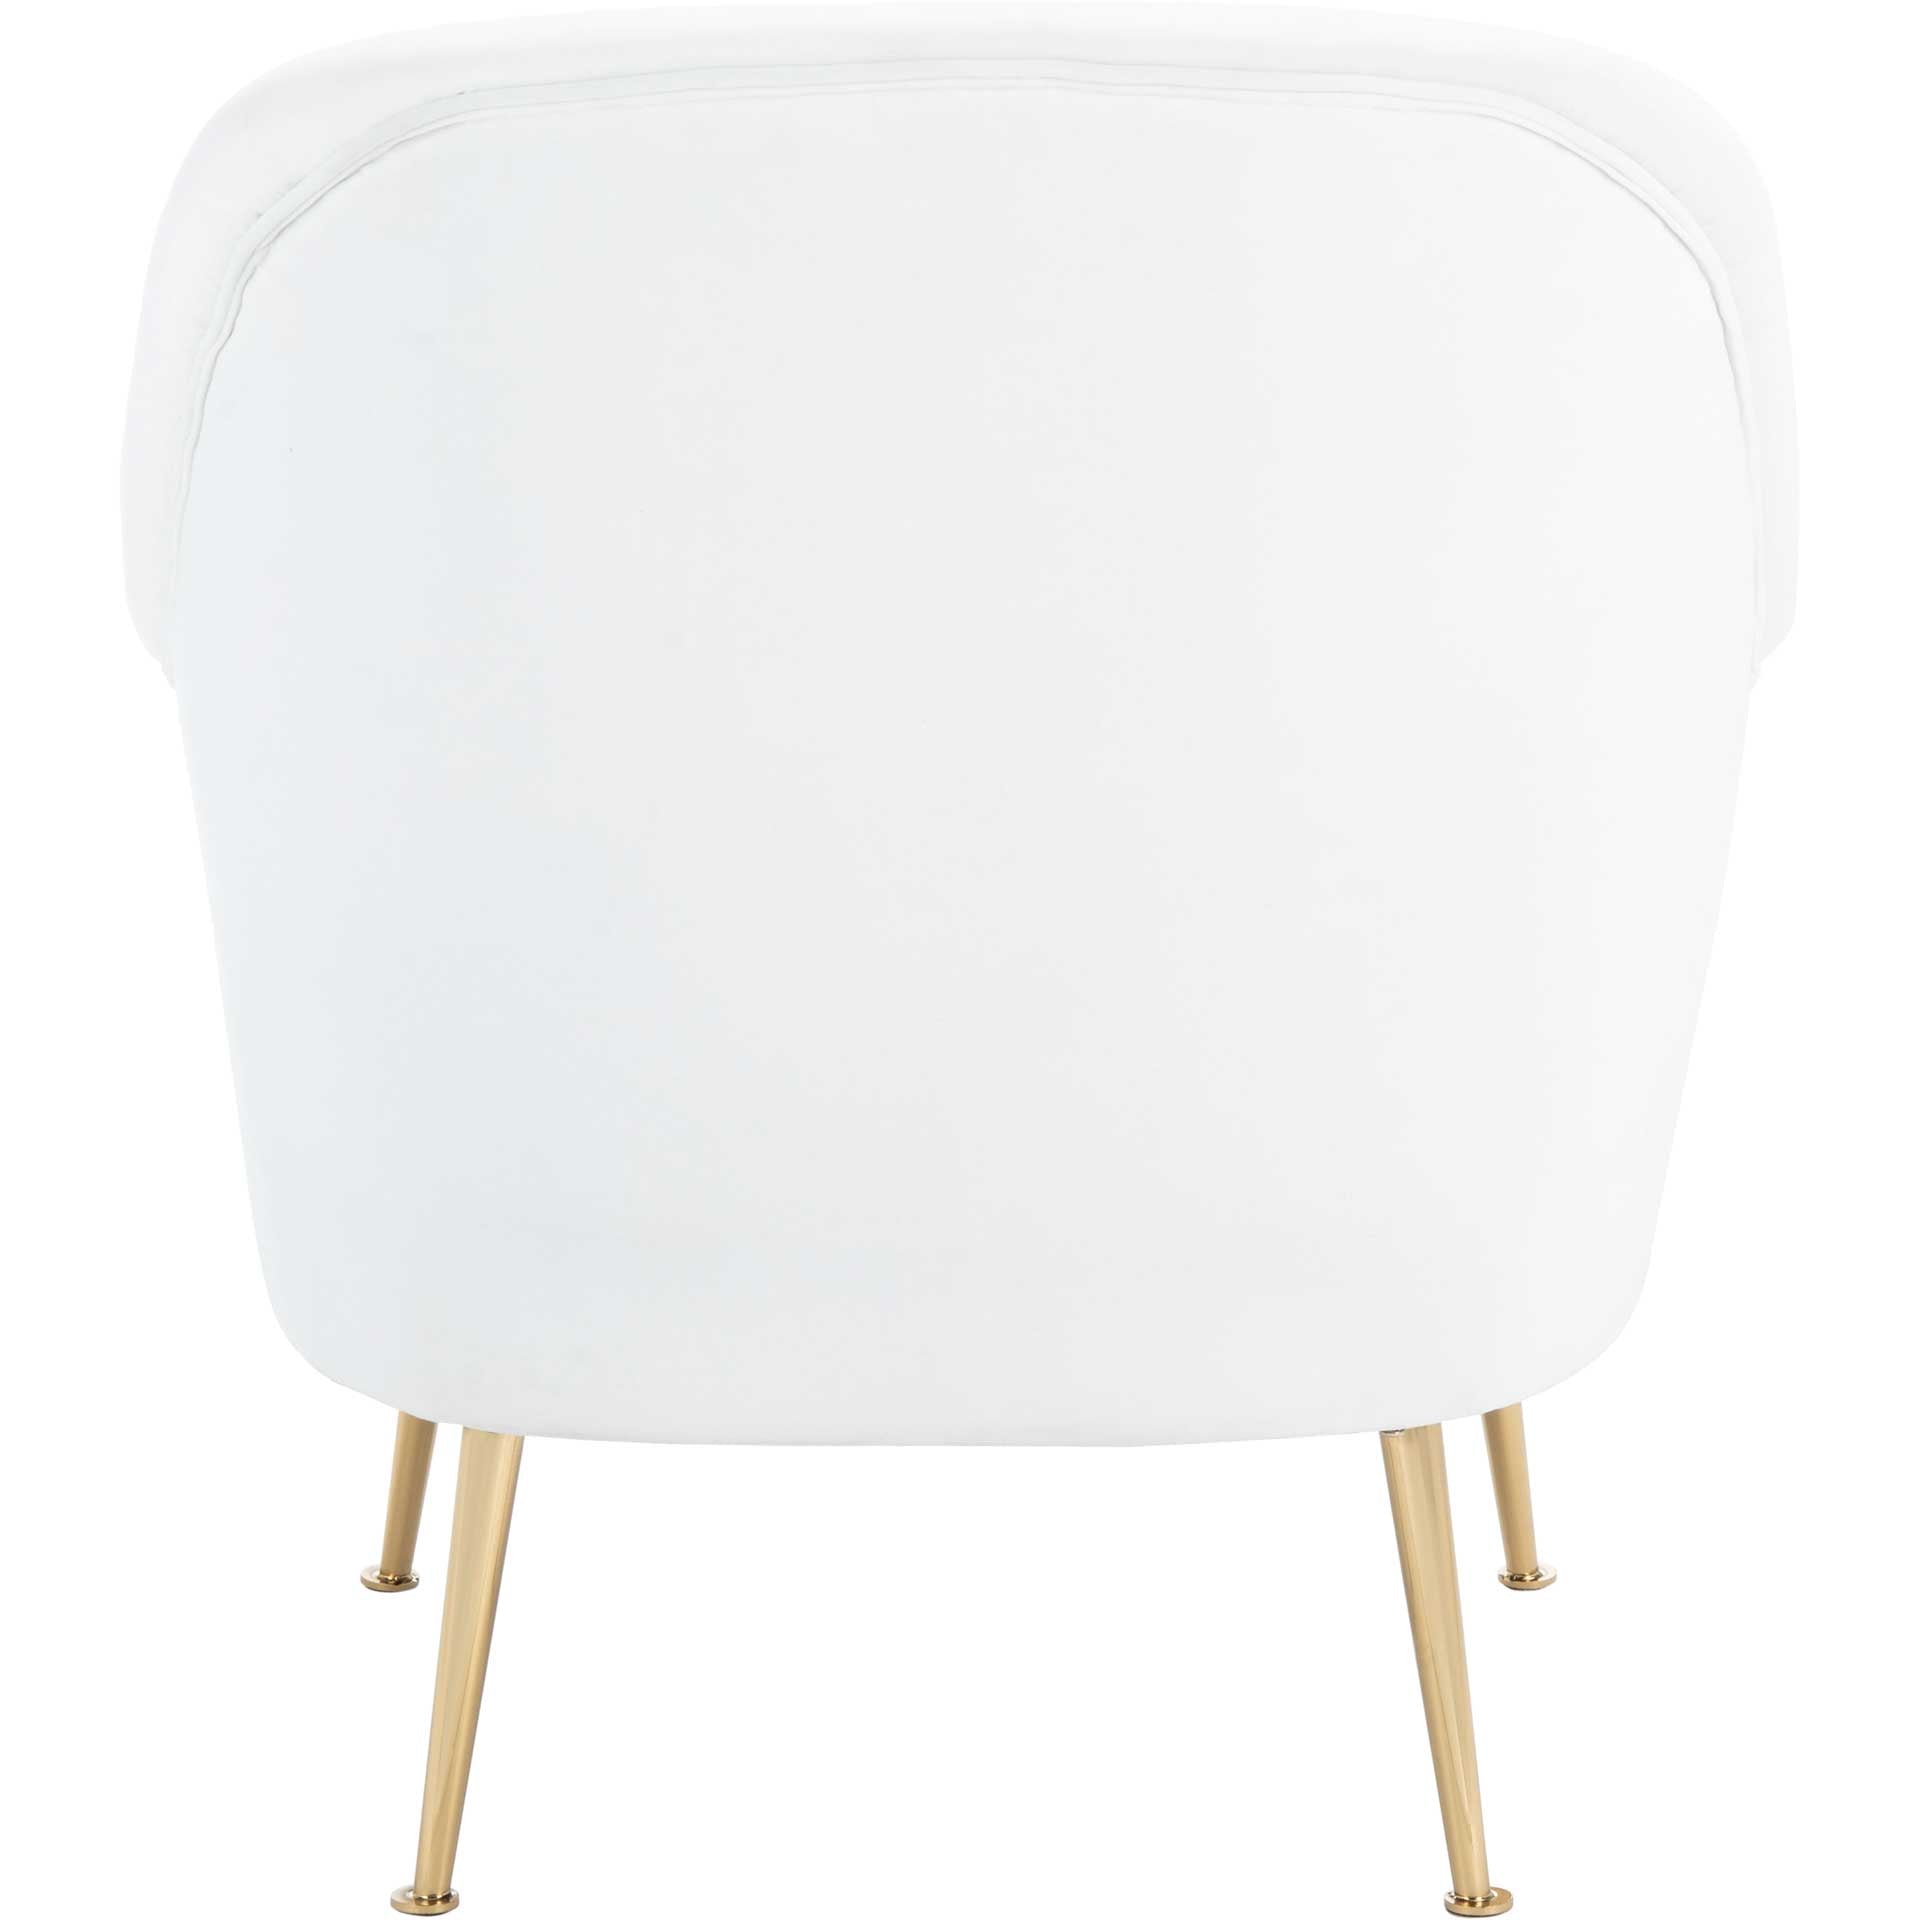 Rockford Accent Chair White